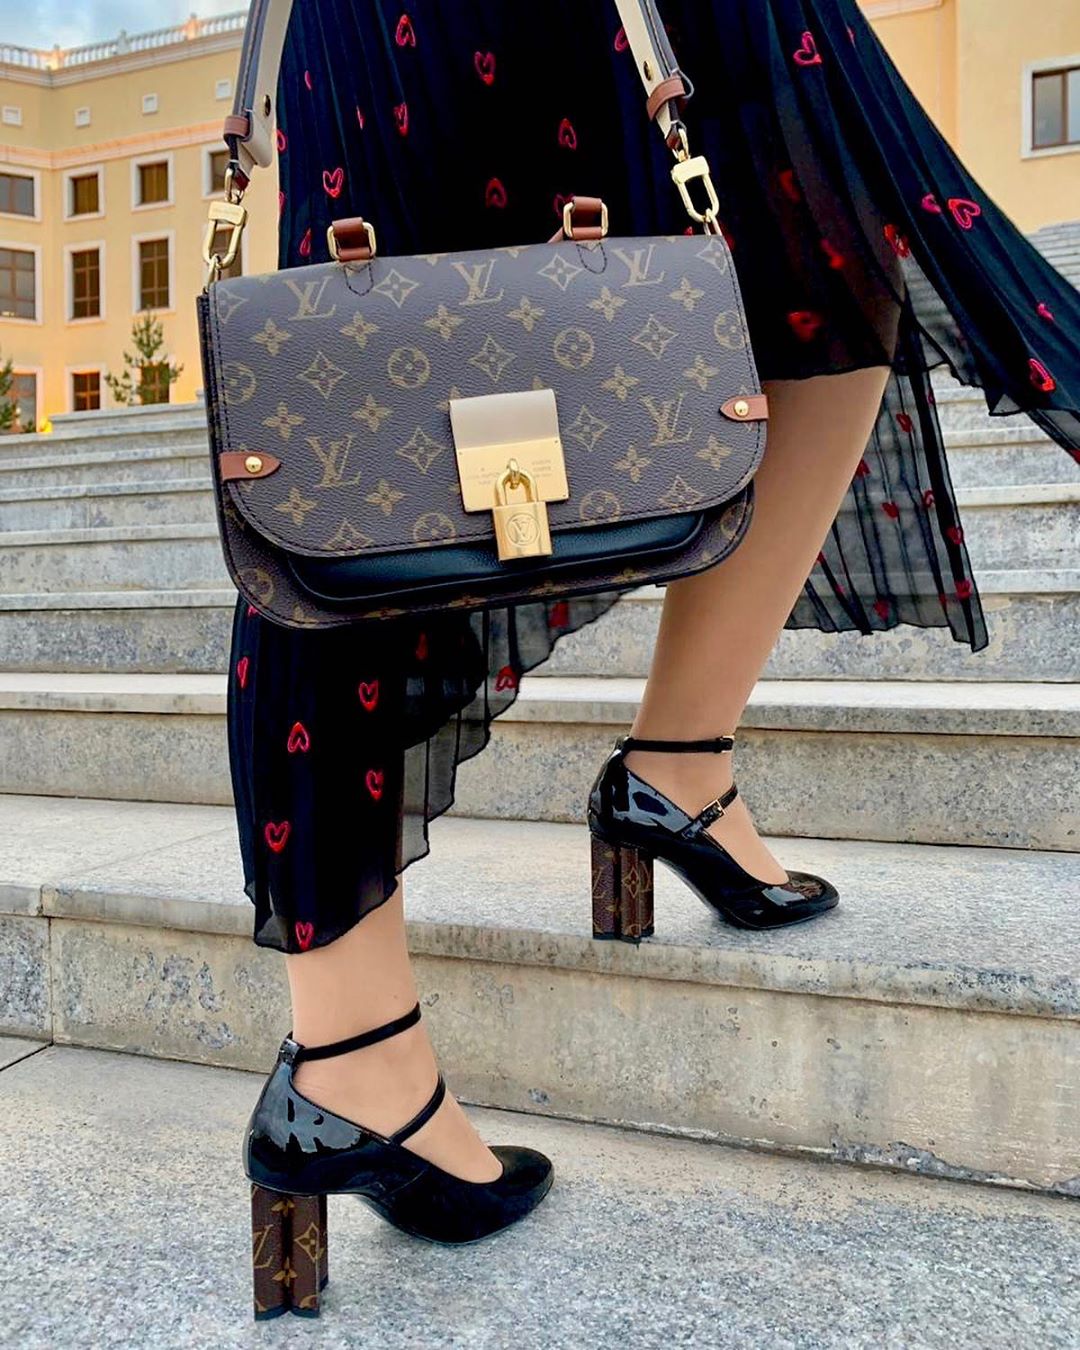 Are Louis Vuitton products made in China? Which LV products are